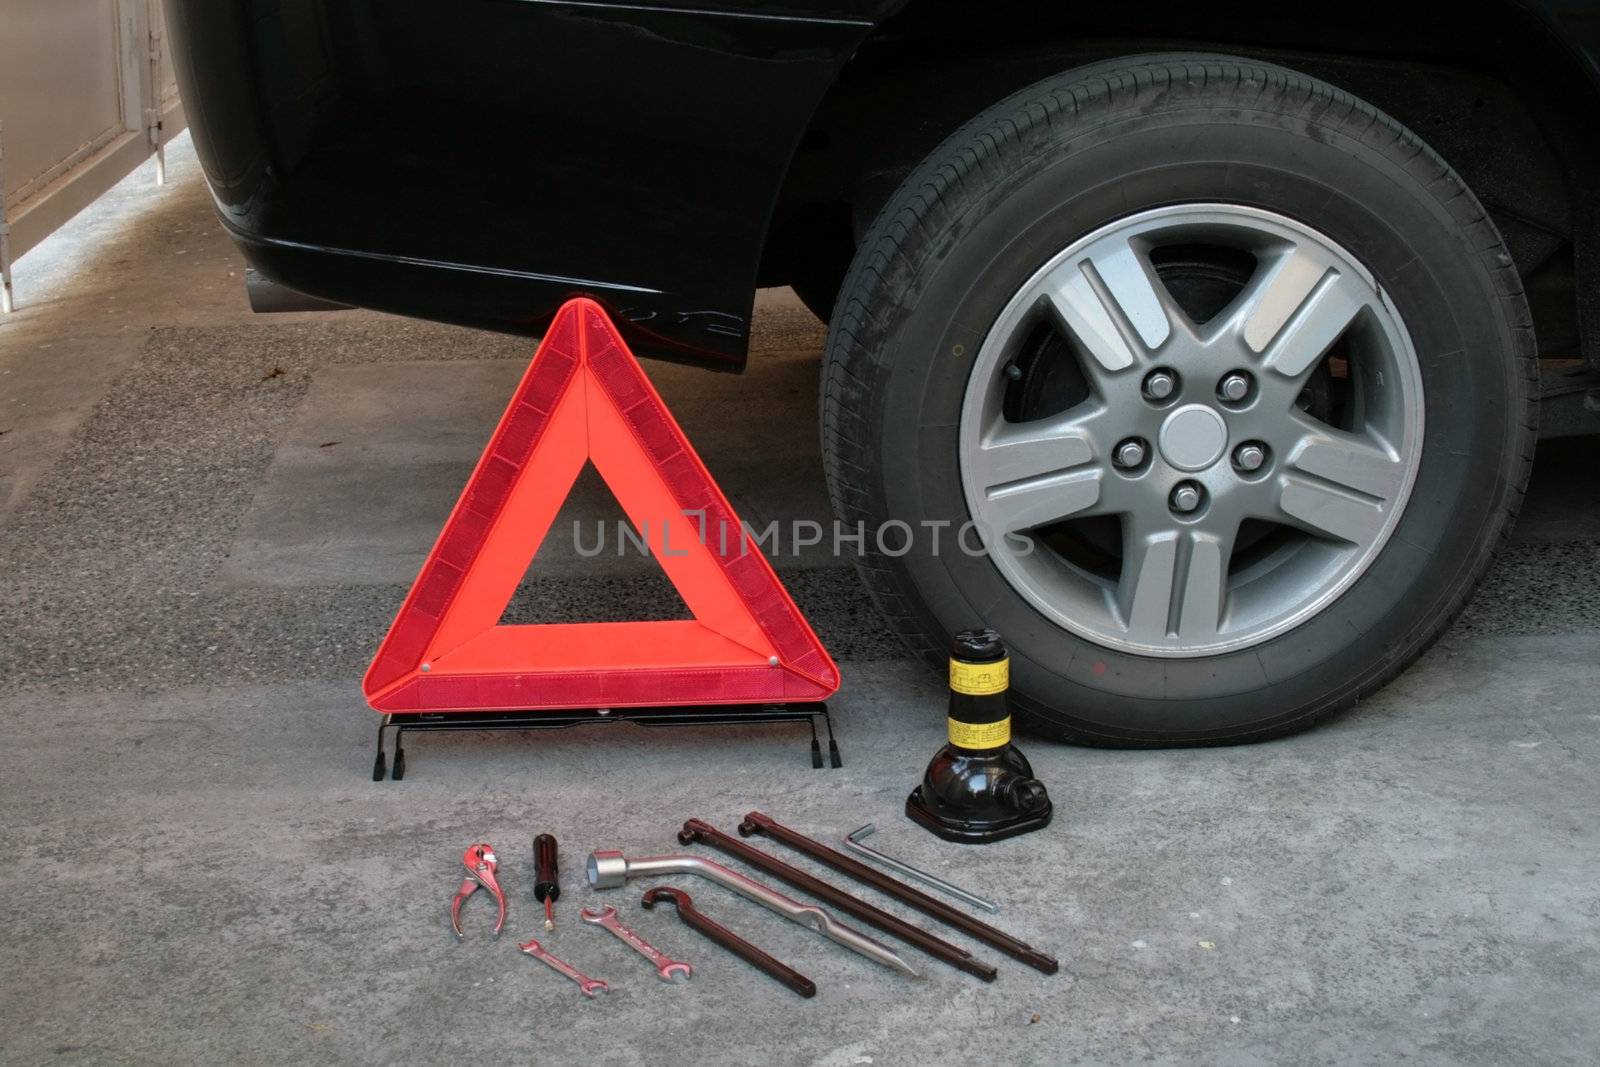 early warning device with tire changing tools
